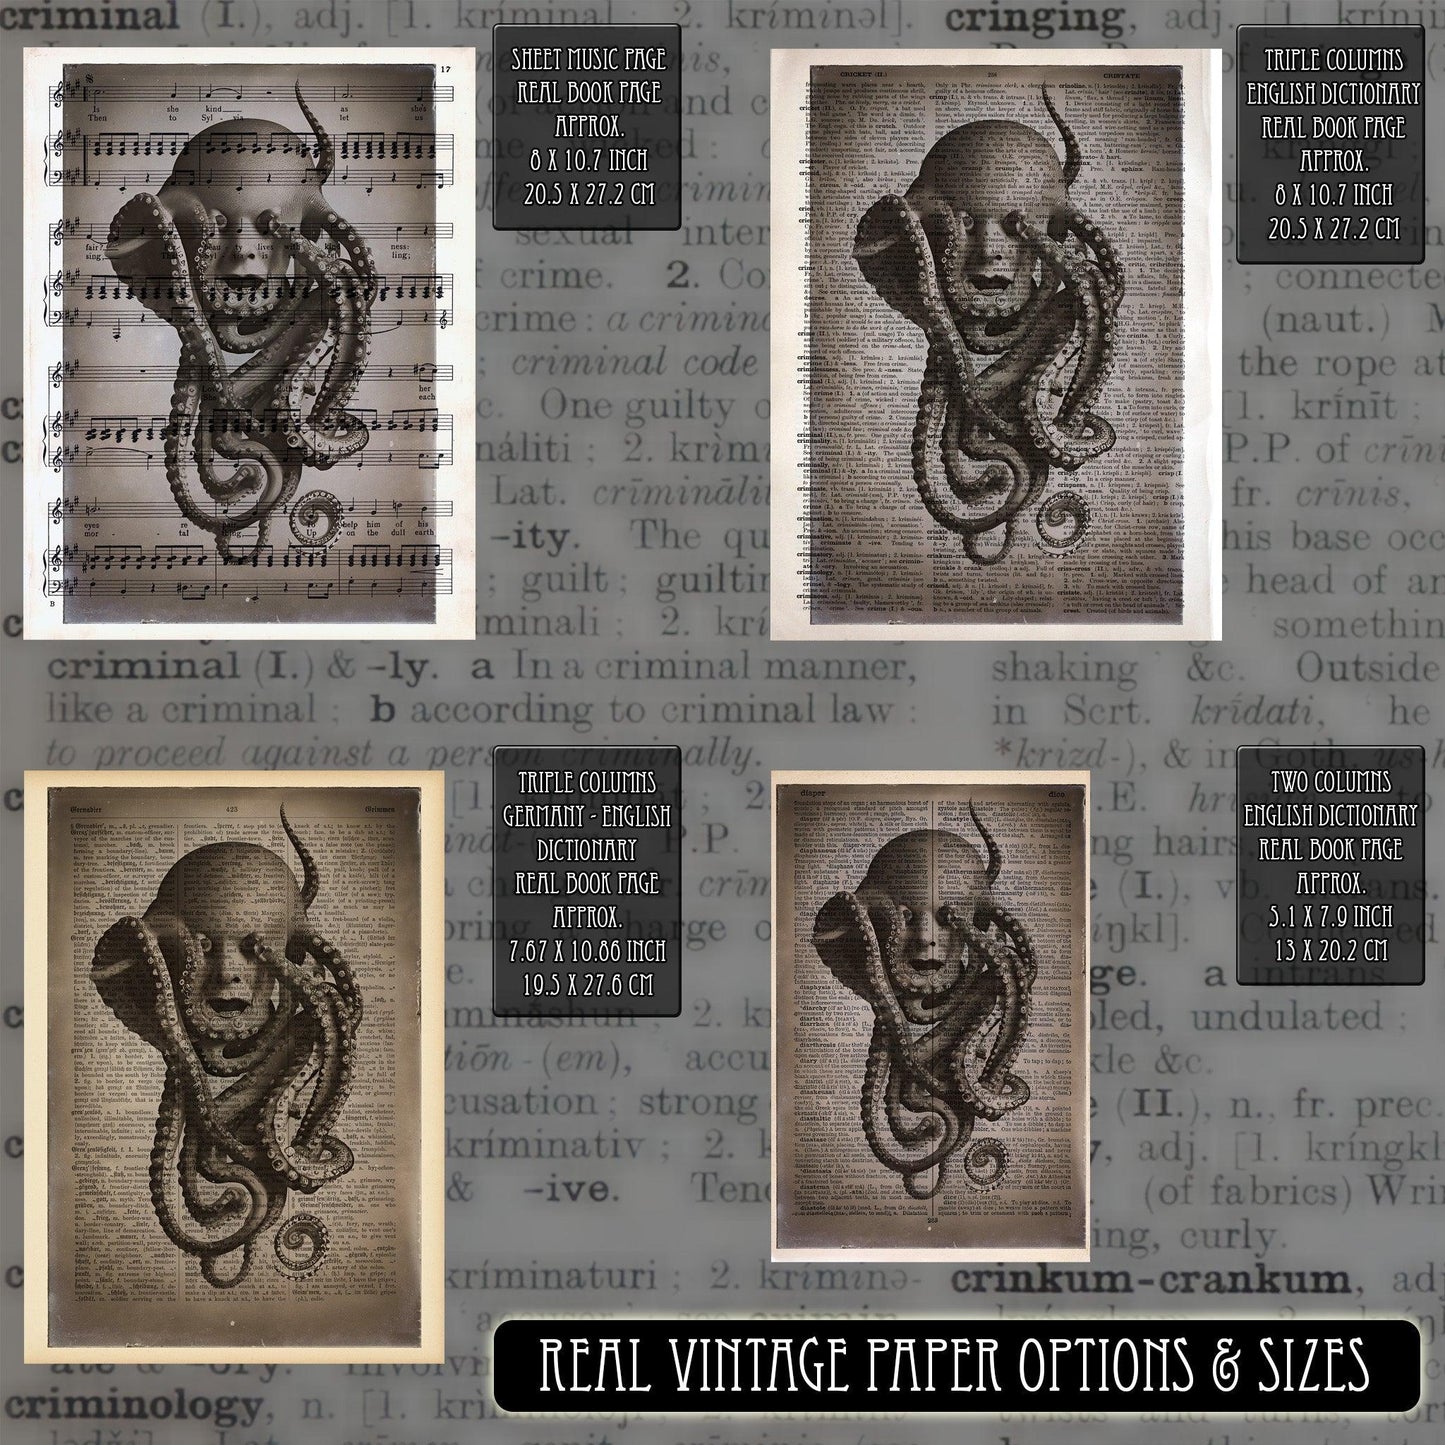 The Tentacle Tribe - Victorian Gothic Art on Vintage Dictionary Page - ArtCursor